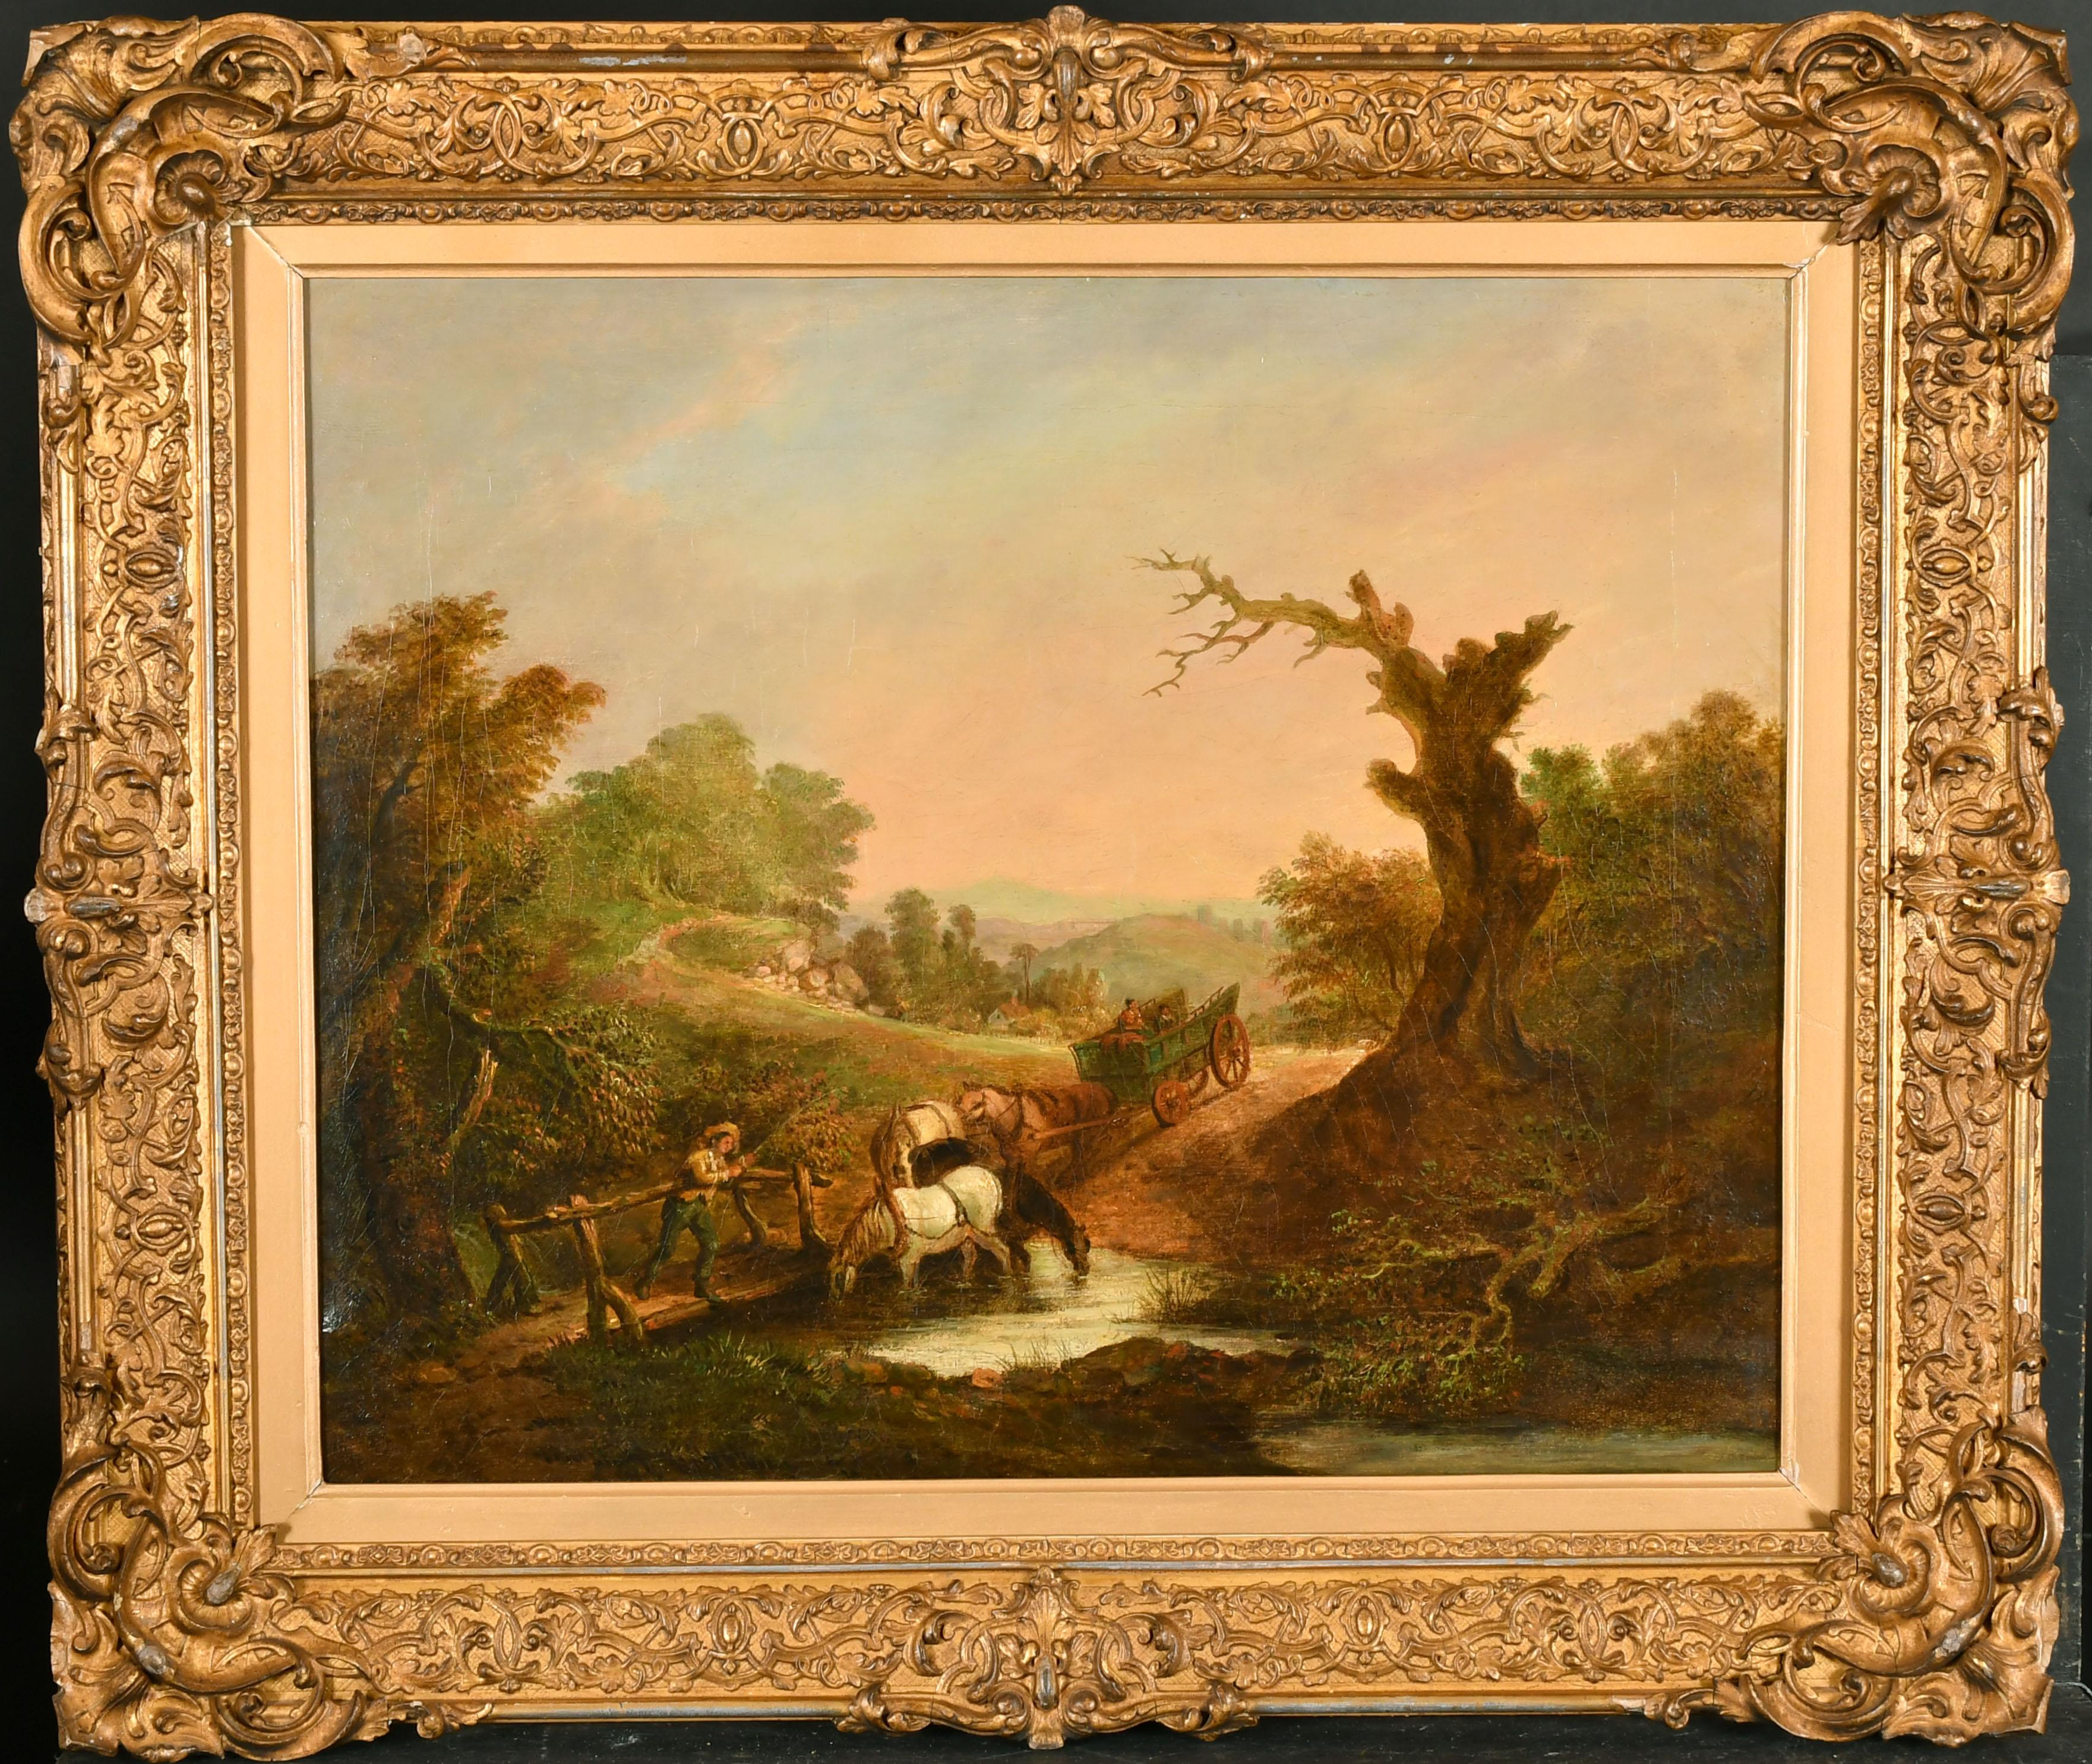 1800’s British Oil Landscape Painting - Early English Romantic Oil Painting Farmers with Horse & Cart crossing Stream